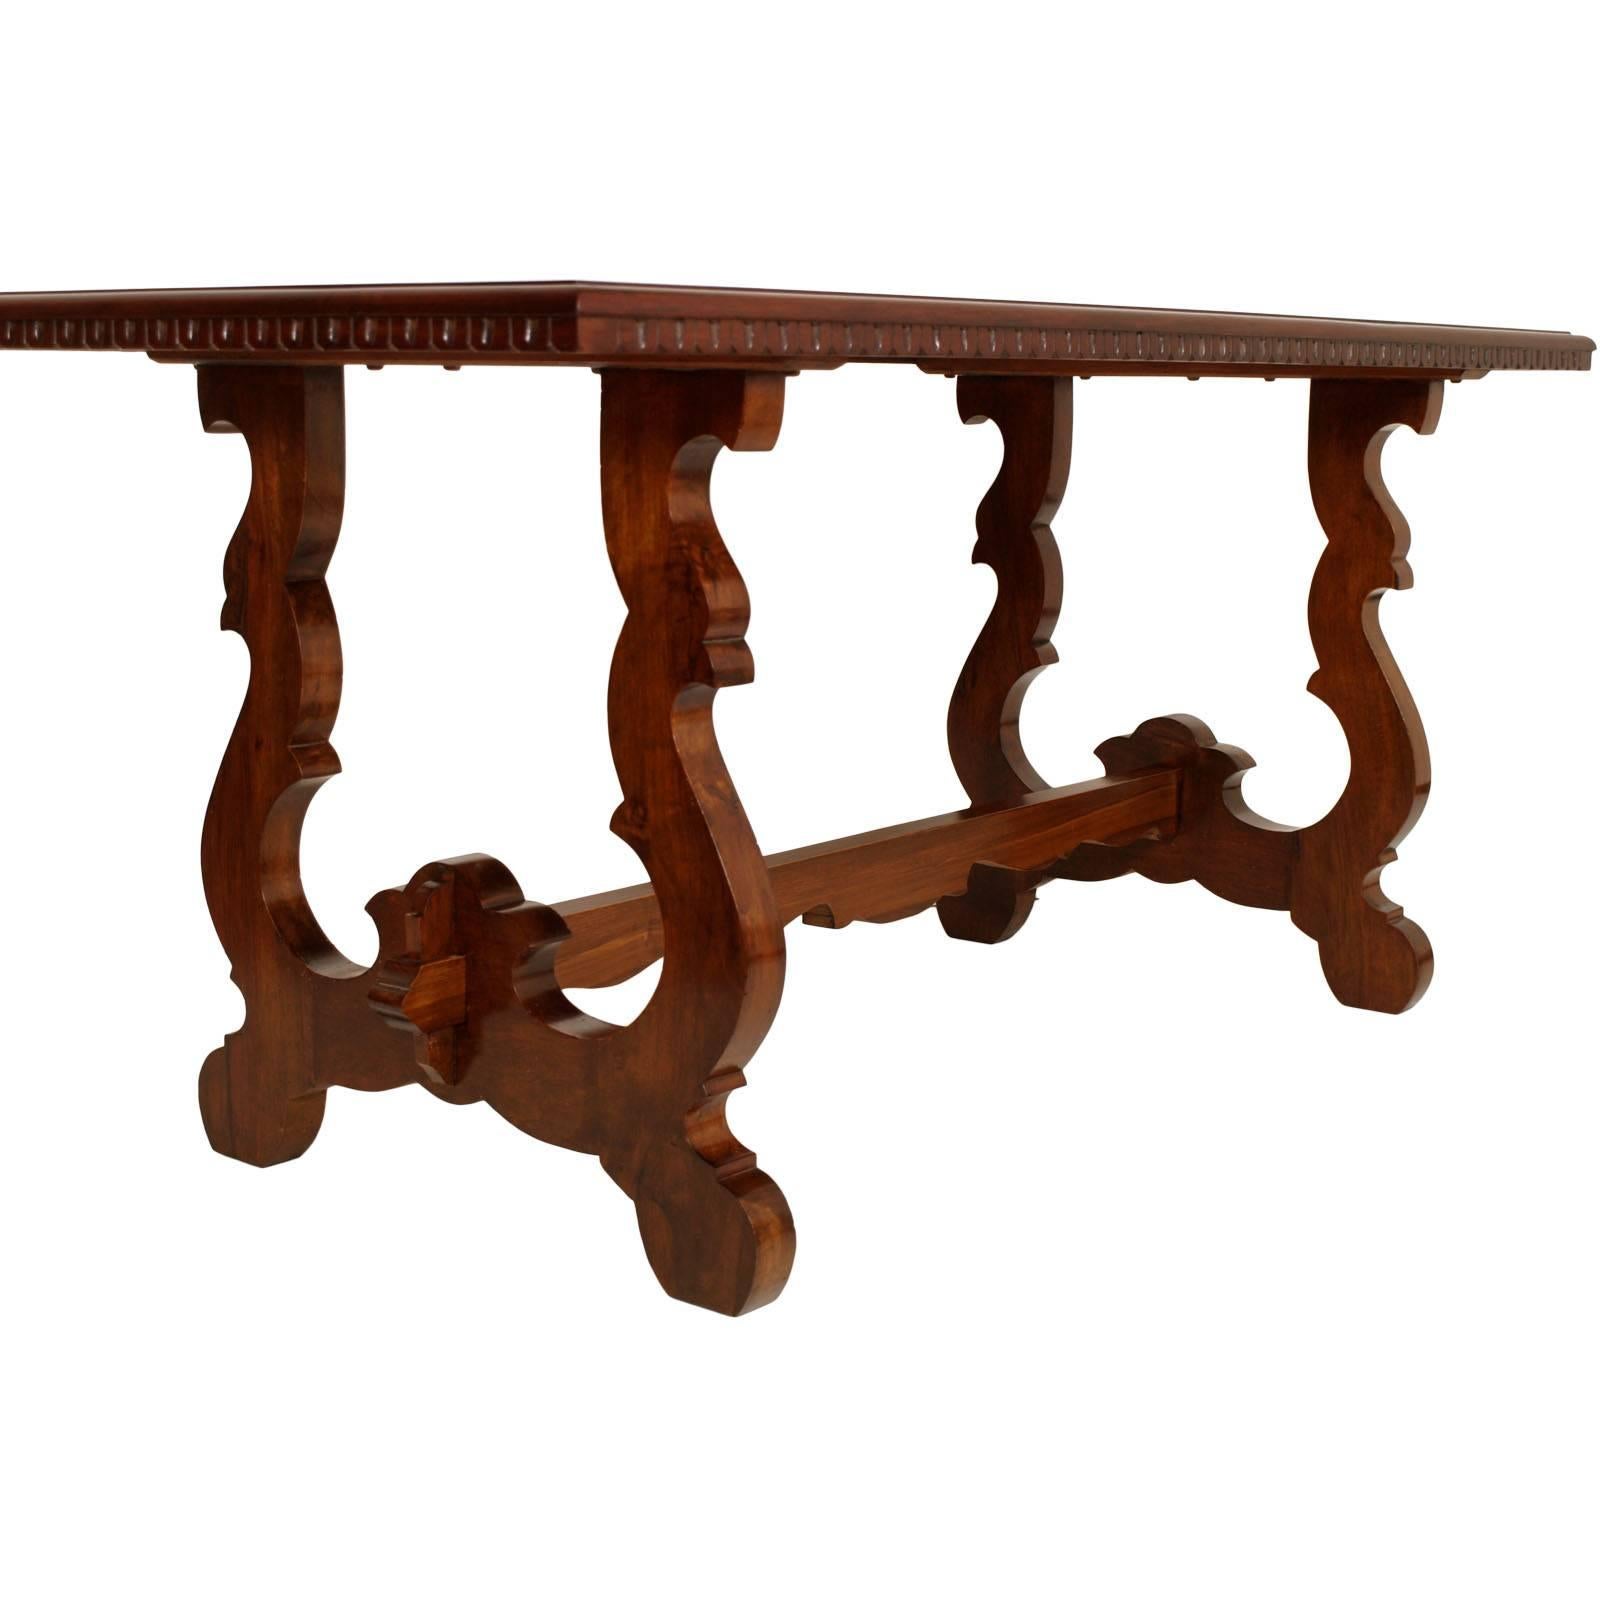 Renaissance Revival Era Art Deco Italian Fratino Table with Lira Legs in Solid Walnut Wax-Polished For Sale